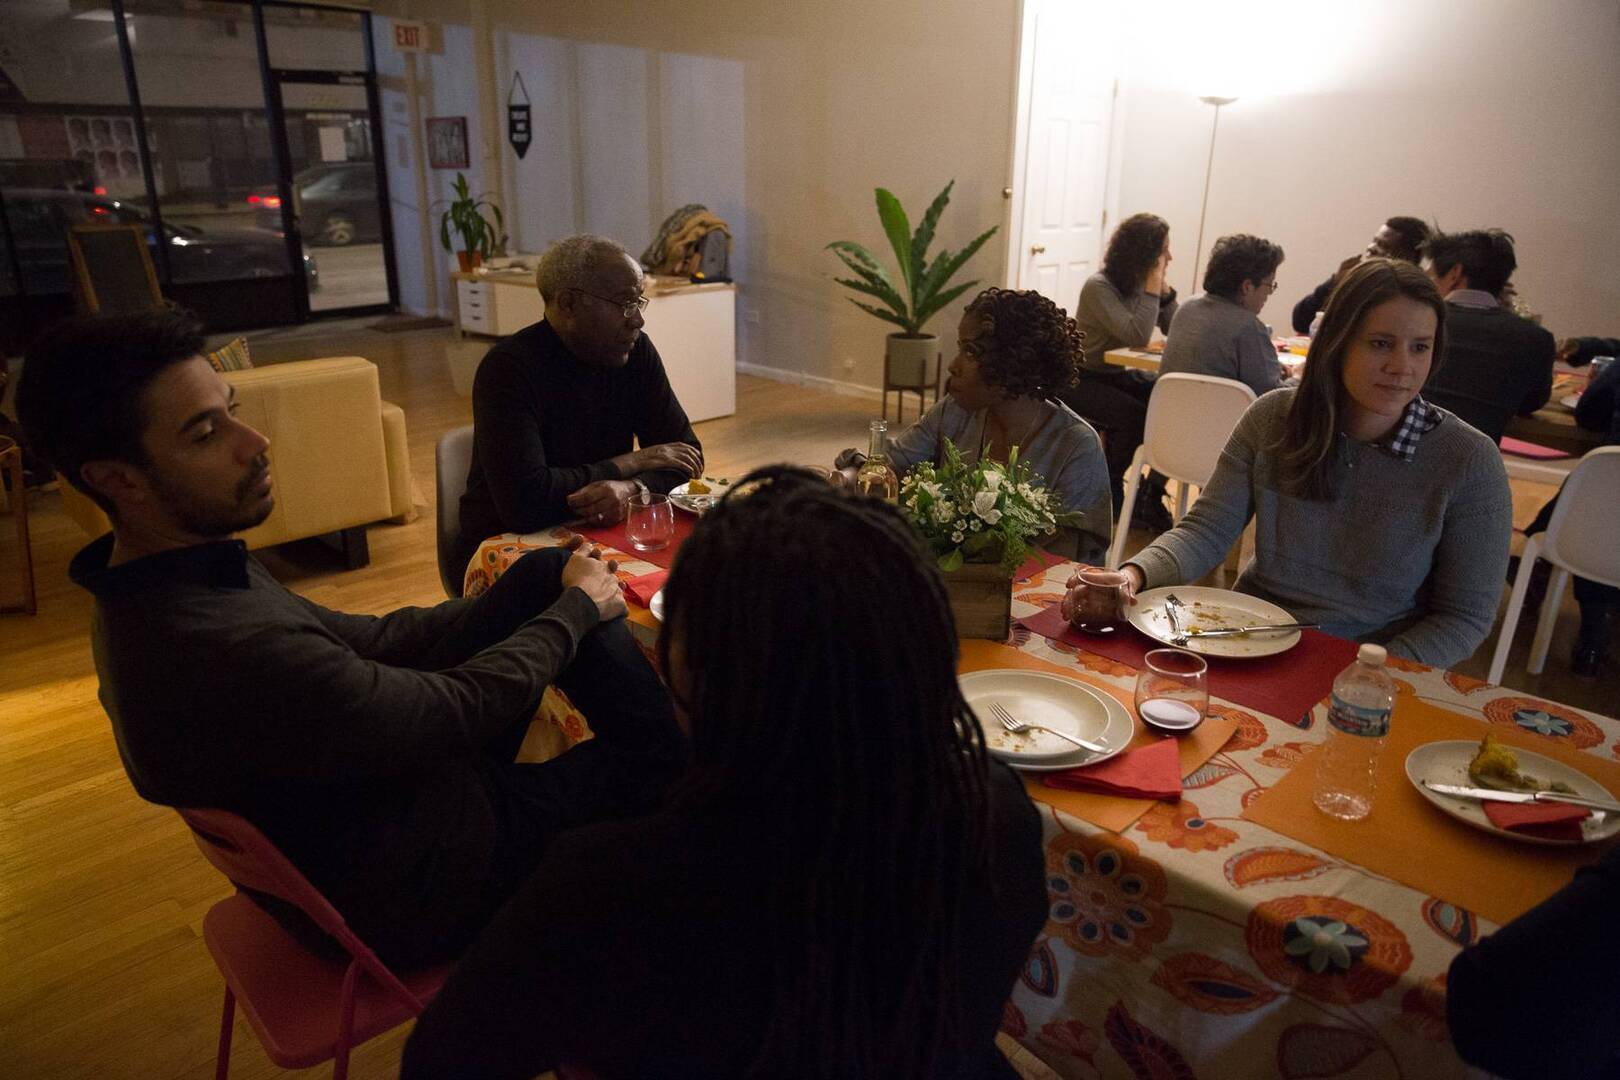 artists breaking bread and enjoying a meal together